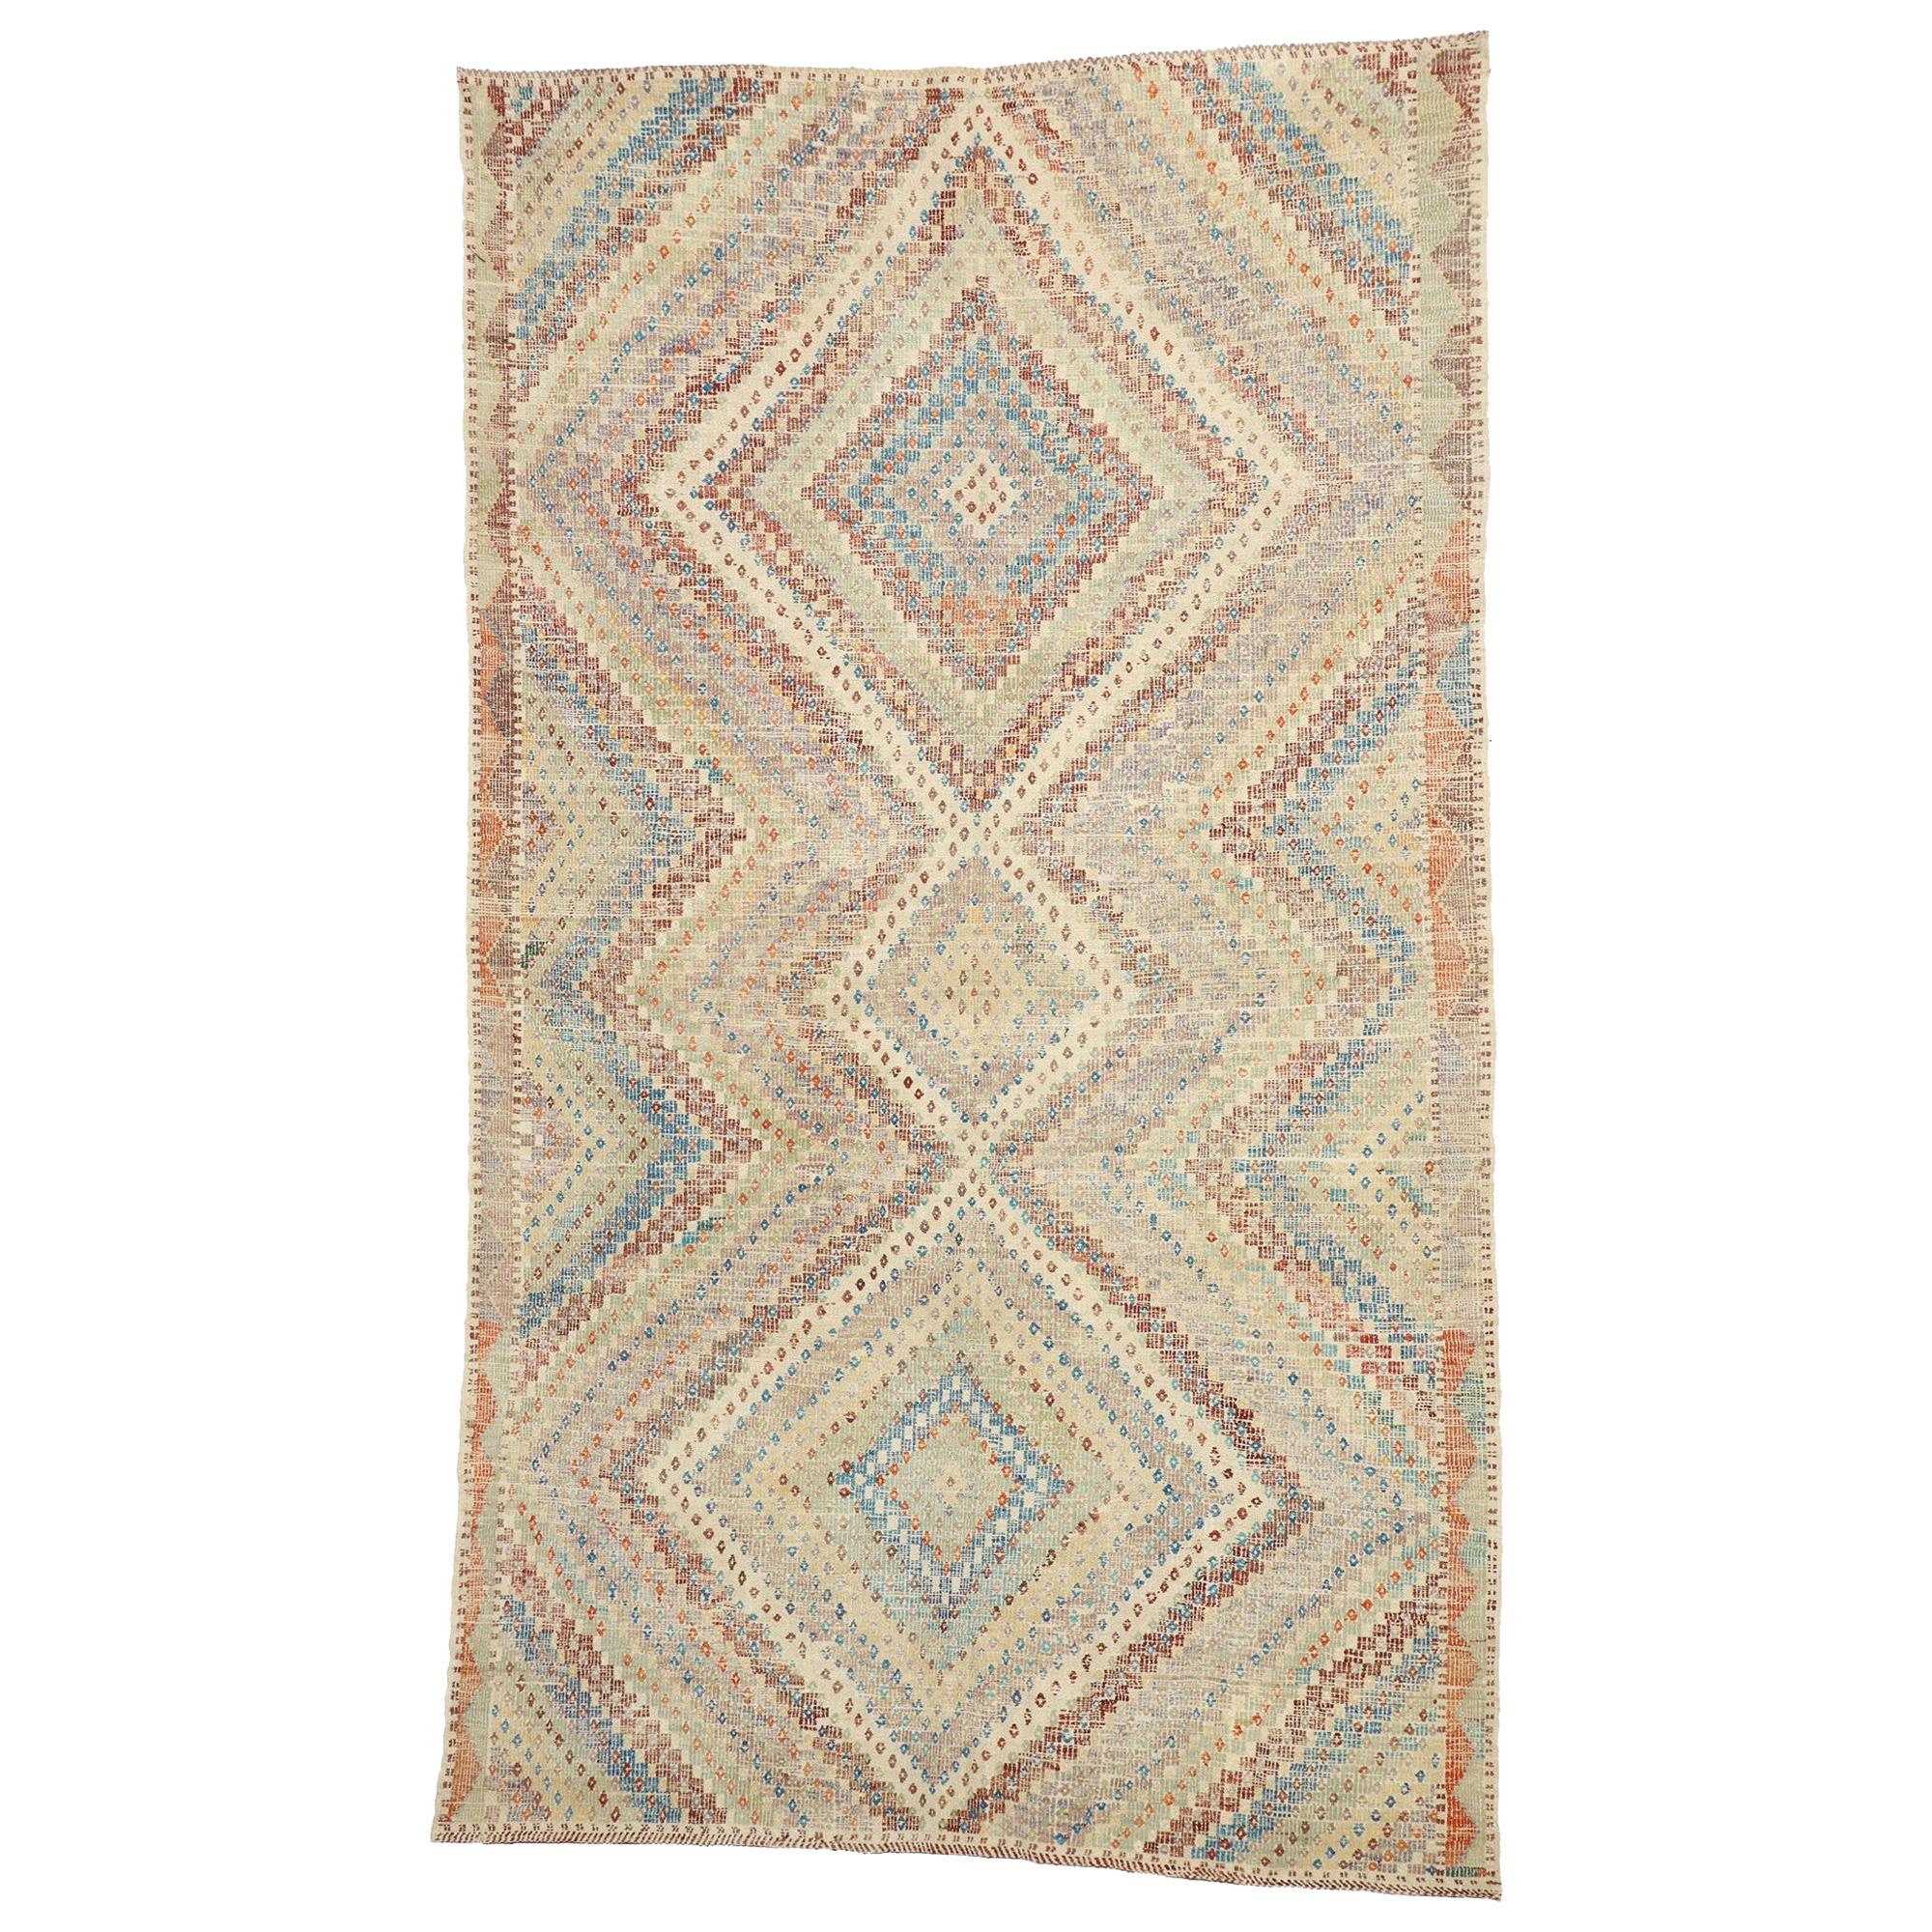 Distressed Vintage Turkish Kilim Rug with Southern Living British Colonial Style For Sale